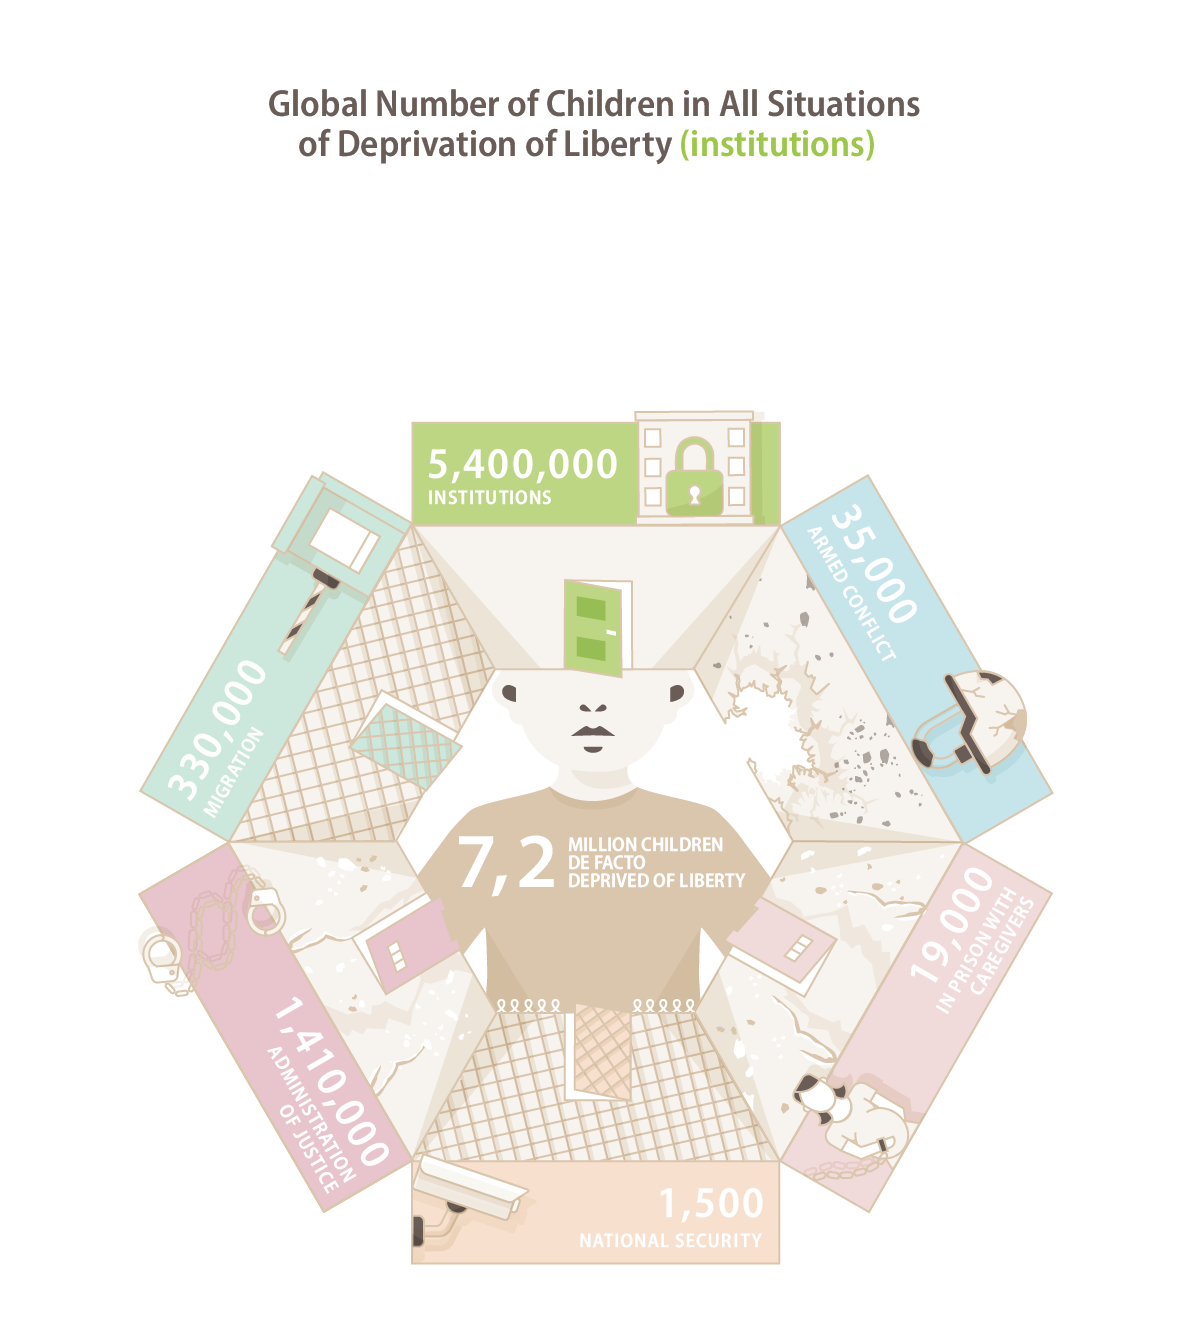 Global Number of Children in All Situations of Deprivation of Liberty (institutions)